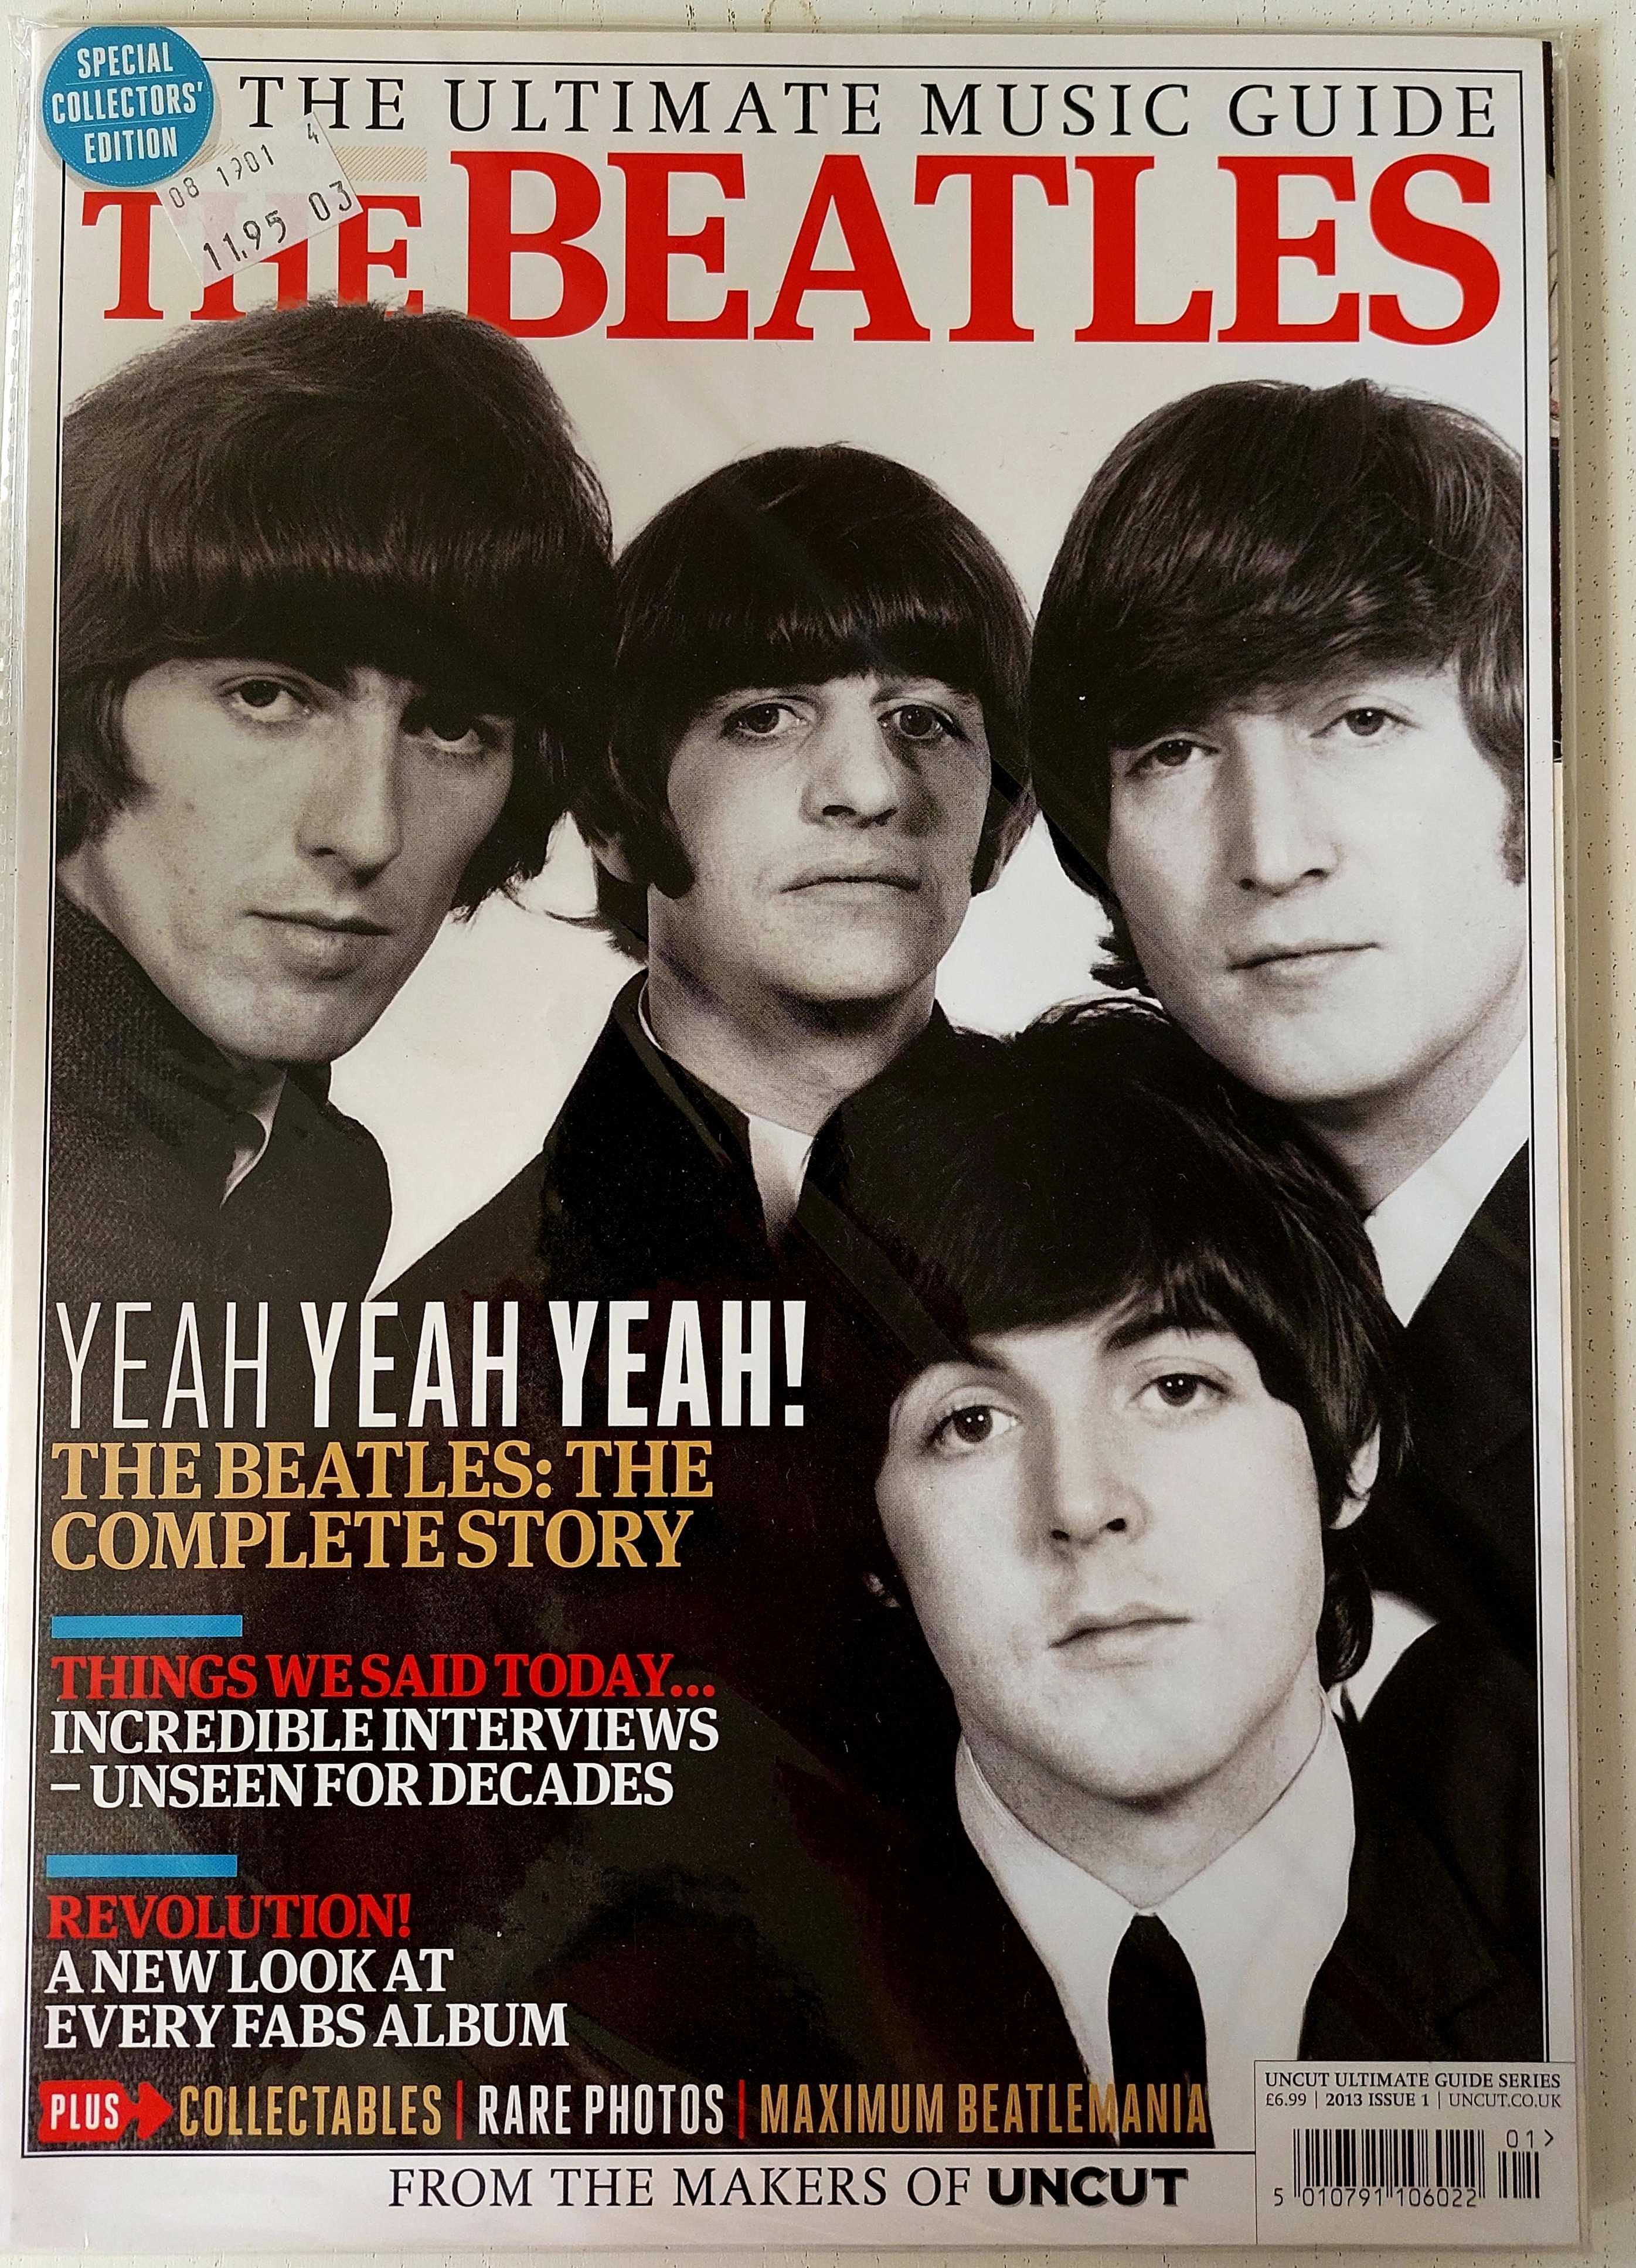 The Beatles Complete Story